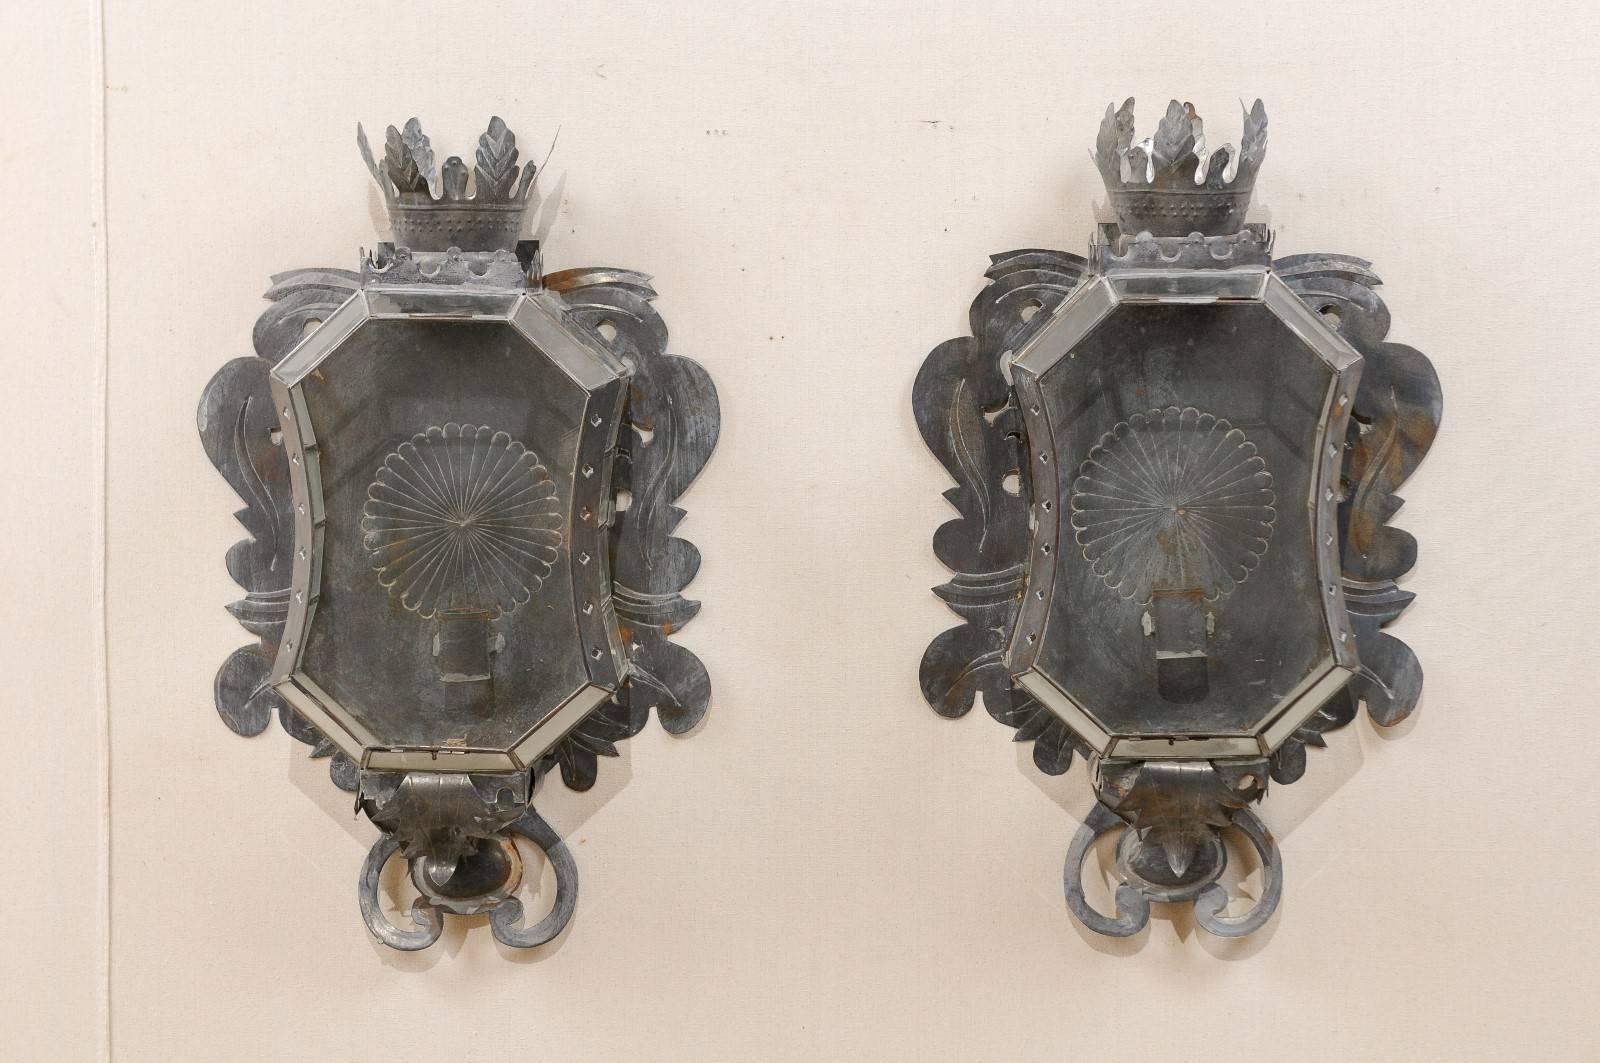 A pair of Mexican Folk Art sconces. This pair of Mexican single candle sconces have been handcrafted from old tin. These sconces feature glass fronts and sides, cut tin accents in a leaf motif, and a leaf and hand-punched crown at top. The interior